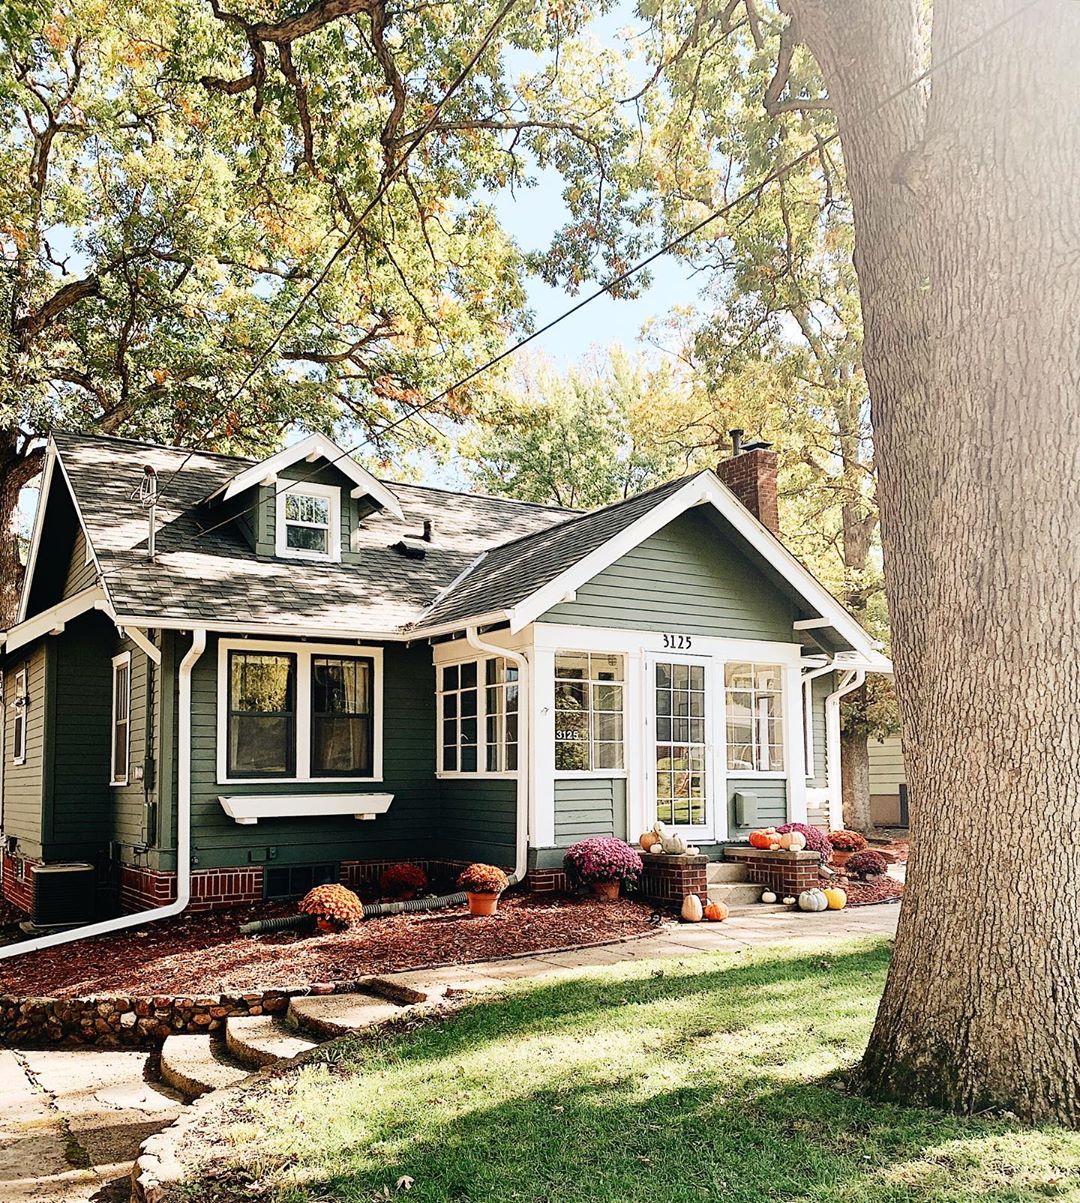 green home with white trim in the sunlight with nice landscaping in the fall photo by Instagram user @brightenmade